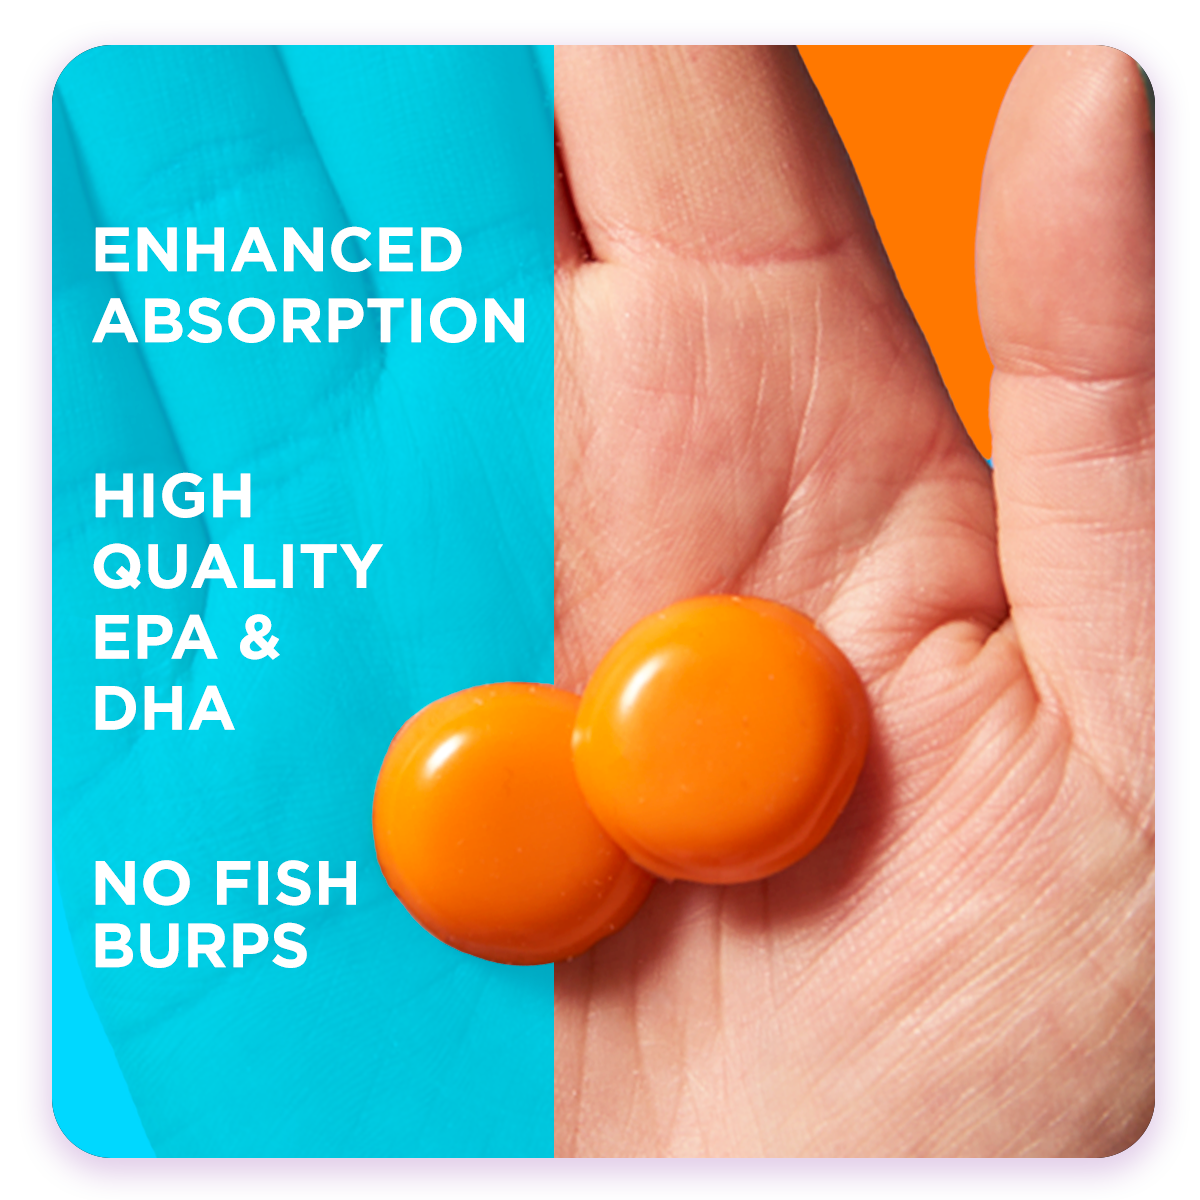 Hand holding 2 Gel Bites with Enhanced Absorption, High Quality EPA & DHA, and No Fish Burps